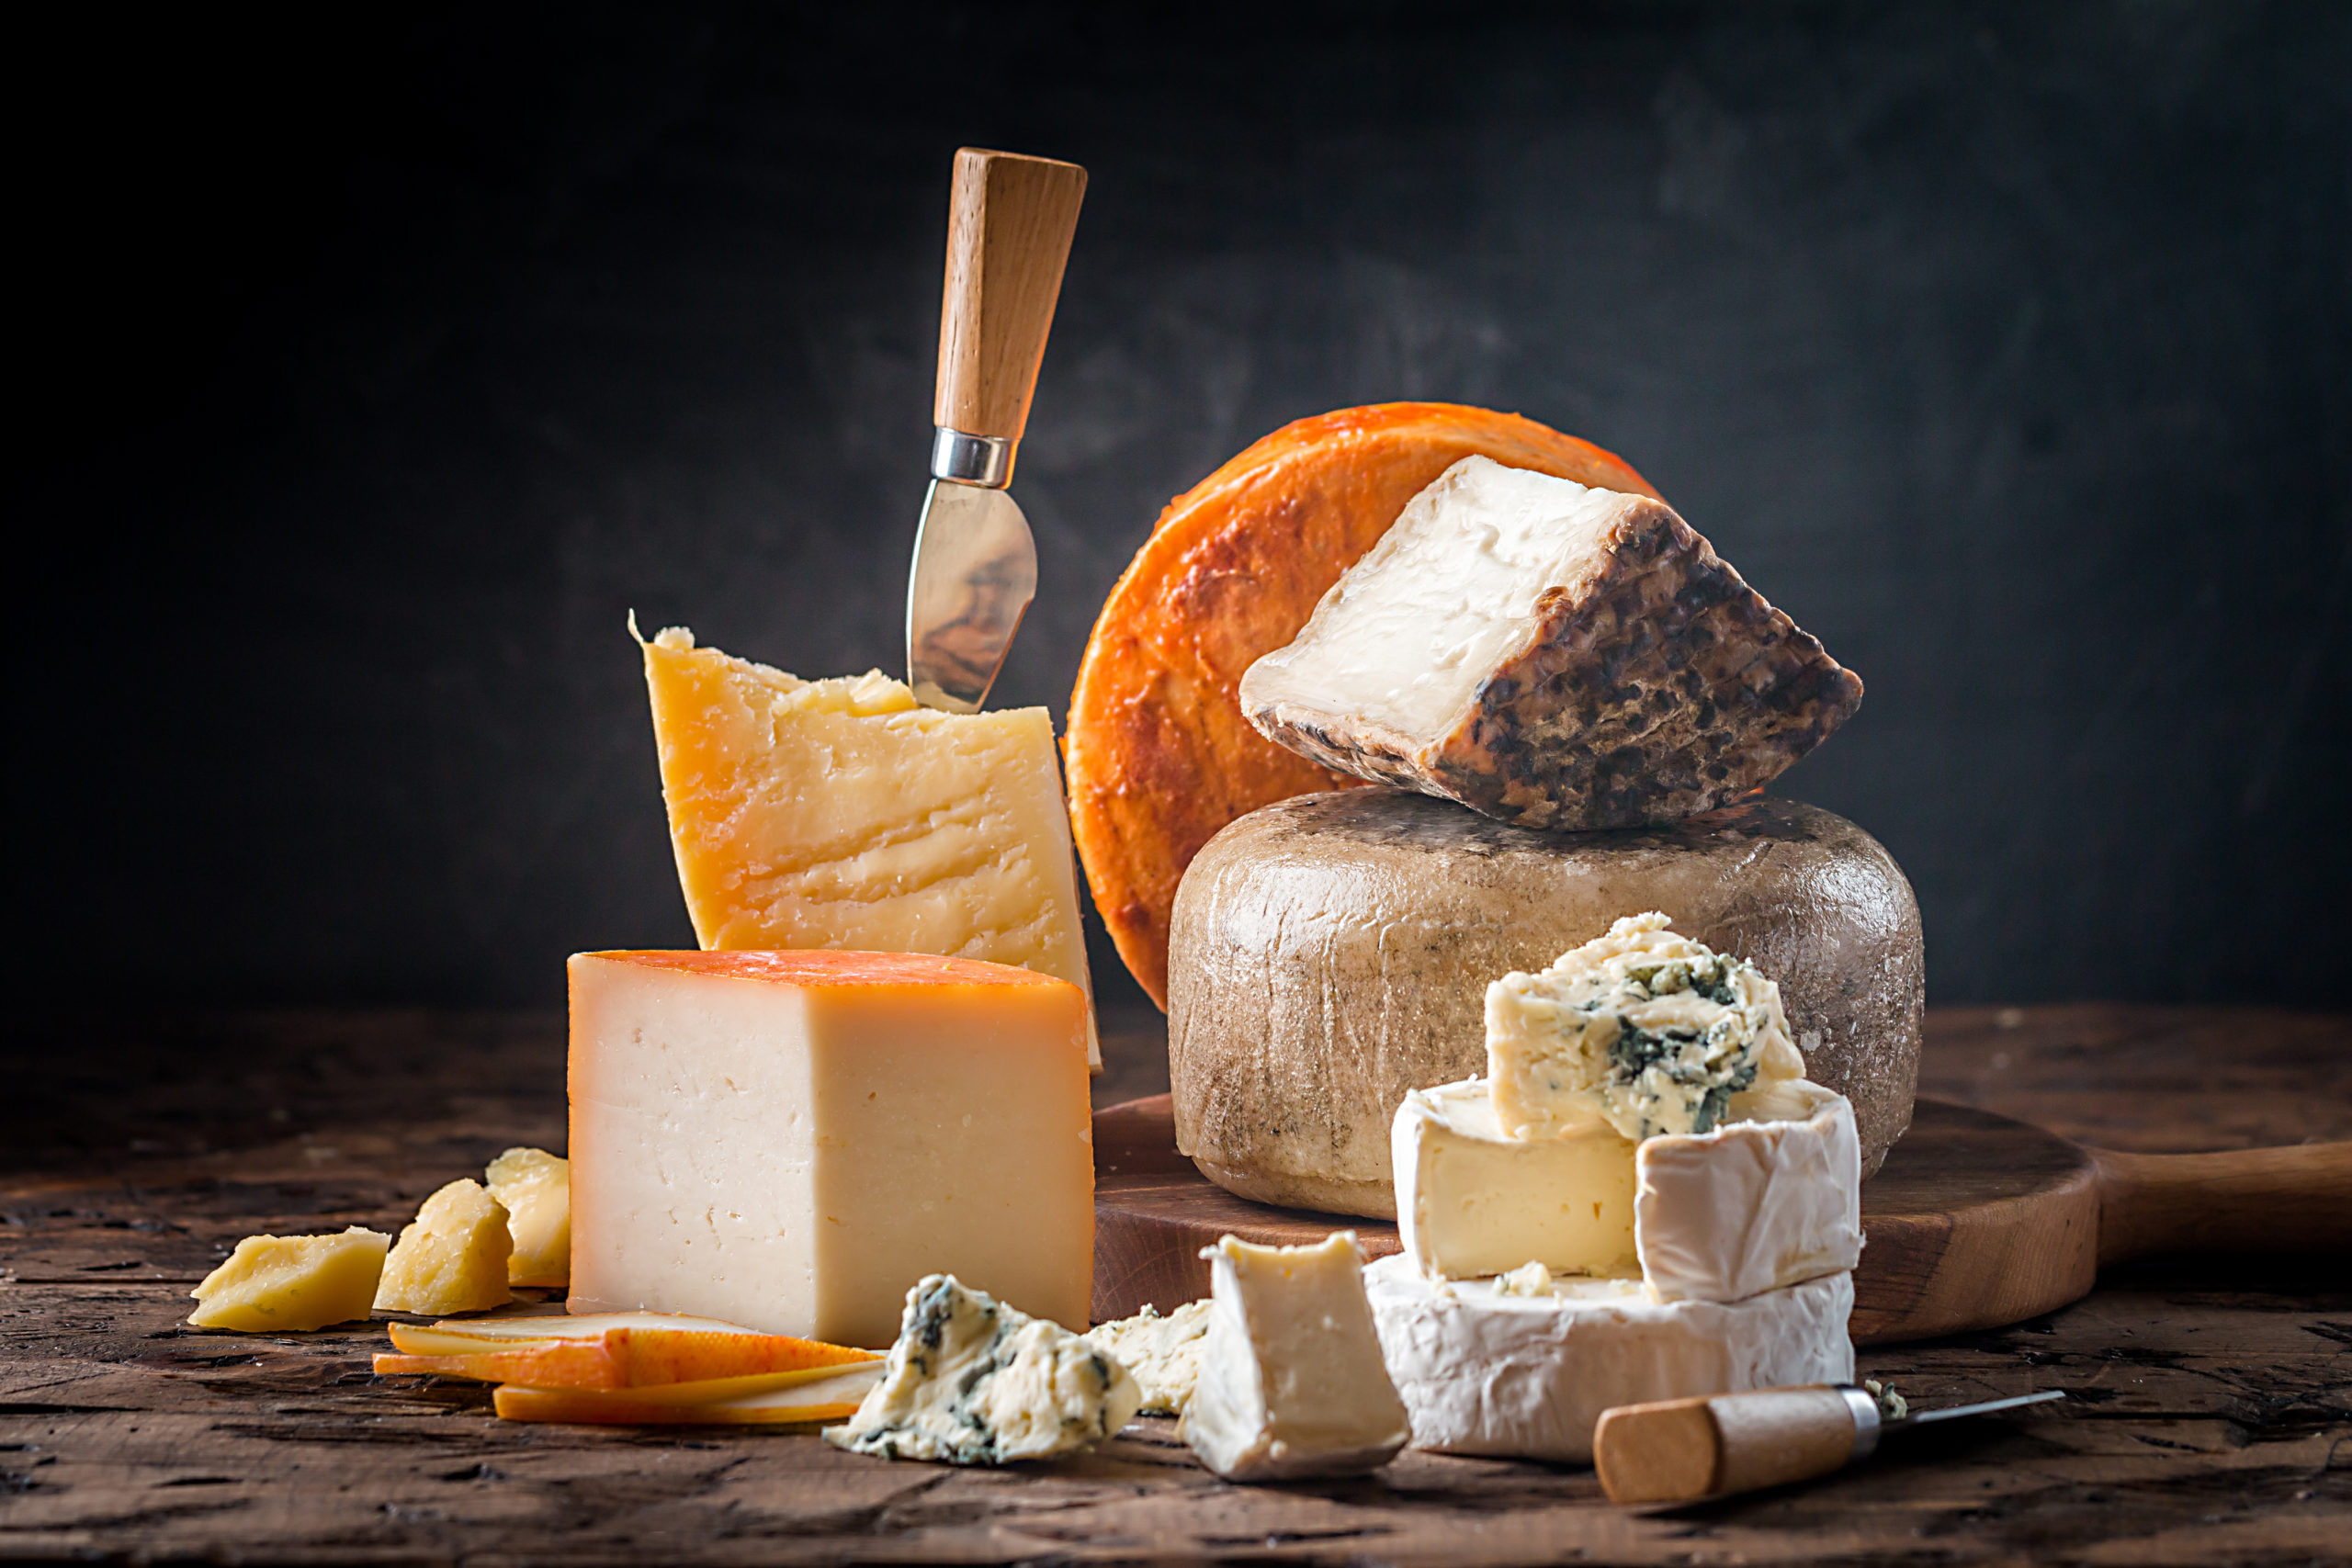 24 Cheeses These Chefs Always Have in Their Fridges